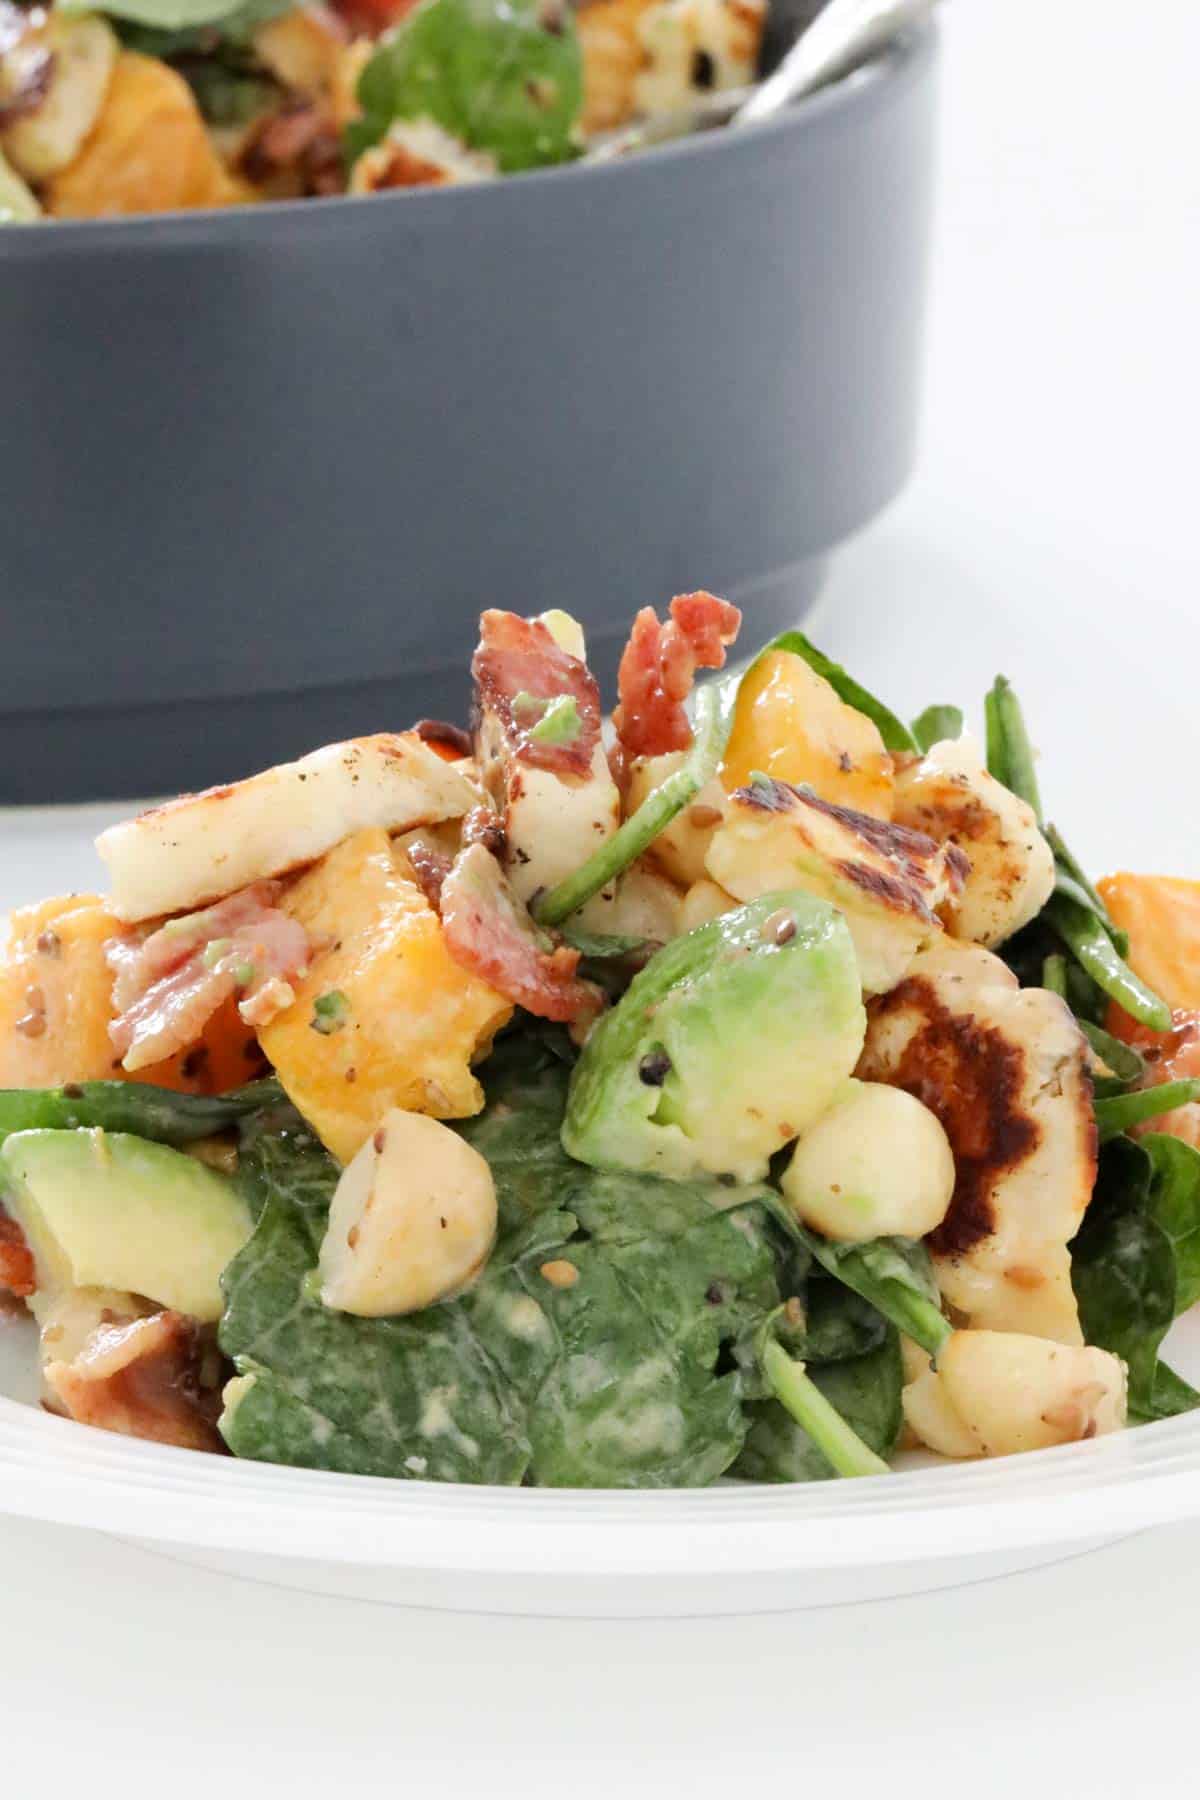 A plate of halloumi salad with bacon and pumpkin, with the serving bowl of salad just visible behind.